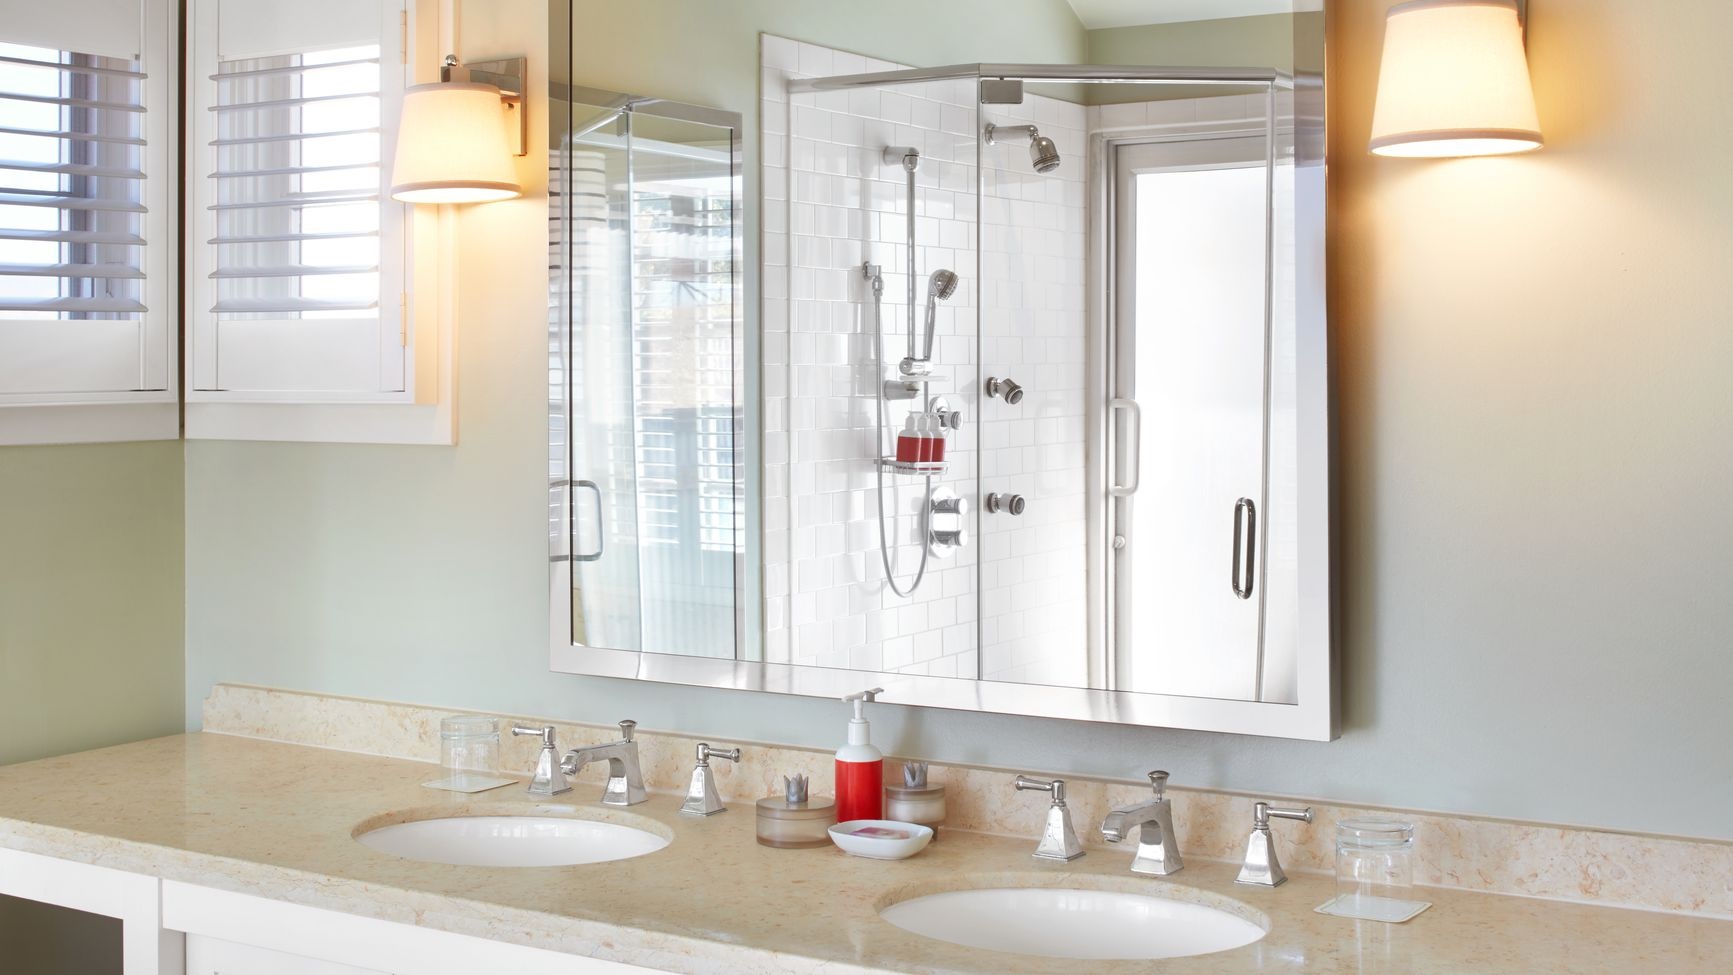 Think Differently For Your Small Bathroom Remodeling